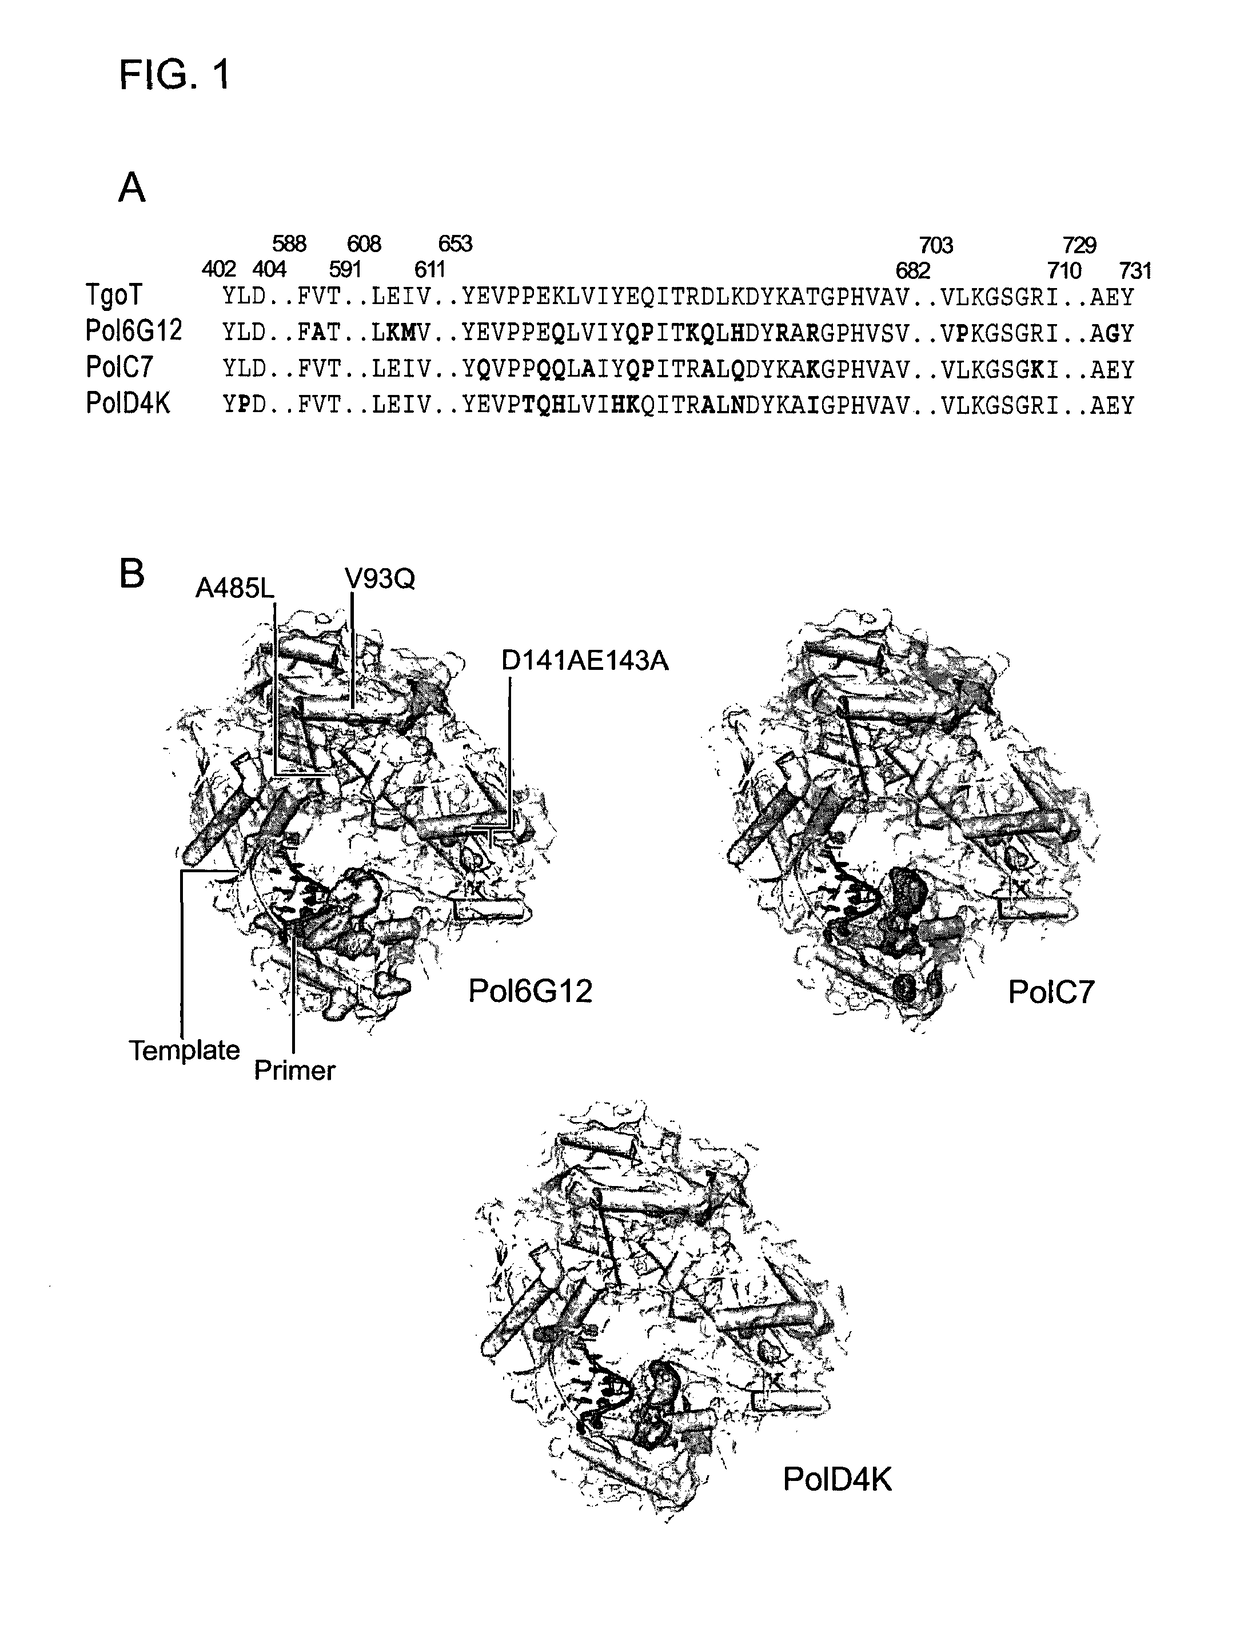 Polymerase capable of producing non-DNA nucleotide polymers